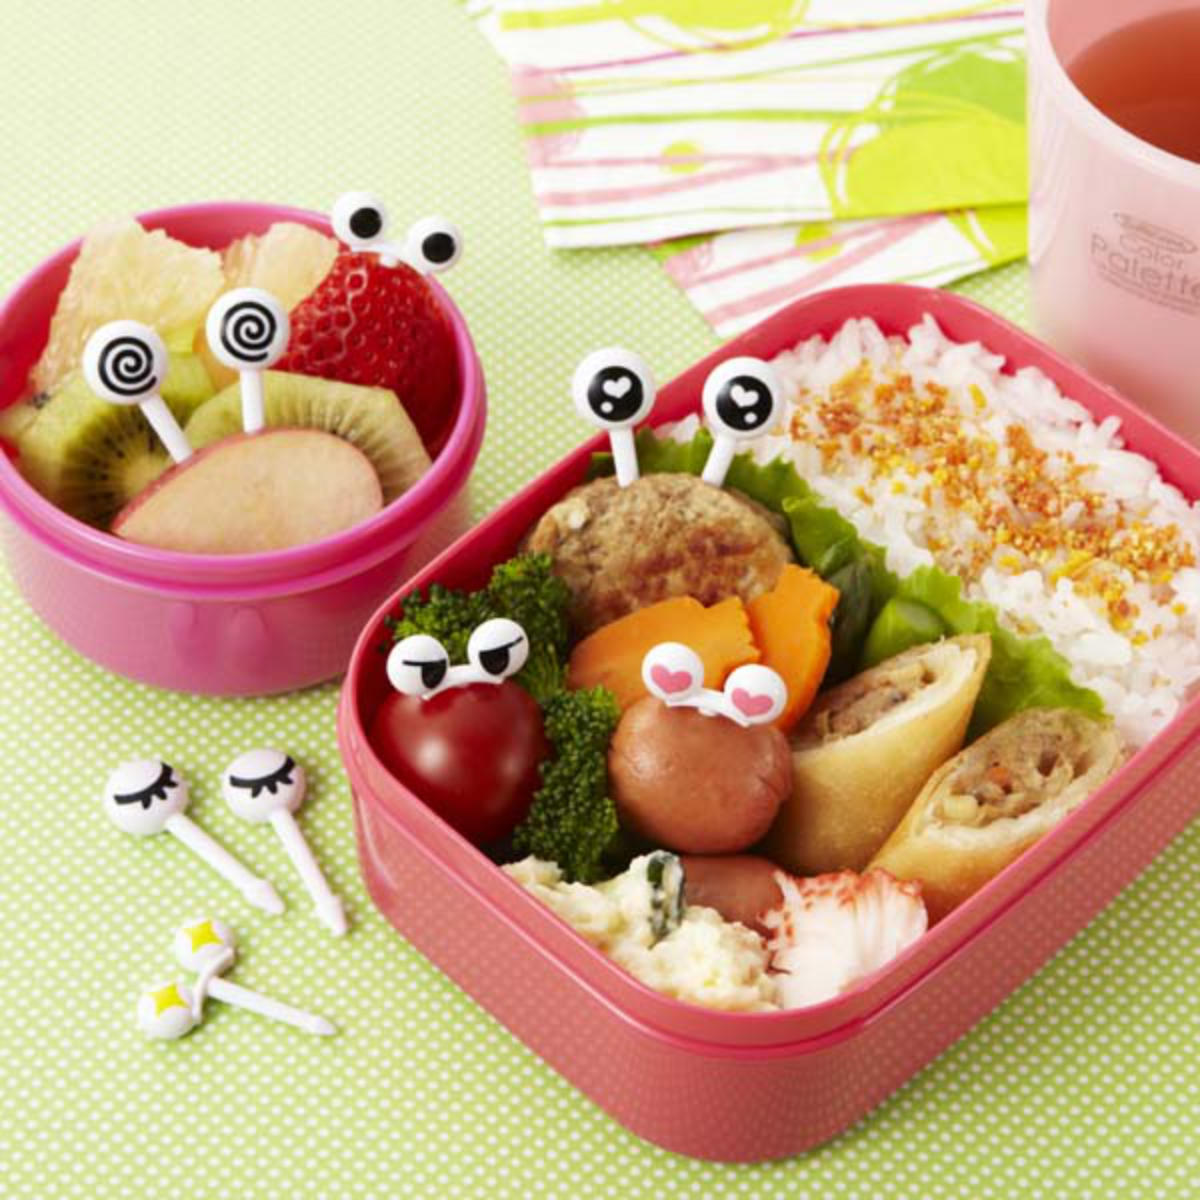  pick Medama pick 2 10 pcs insertion .. present goods ( Cara ... present pick 10ps.@ lunch pick character for children )